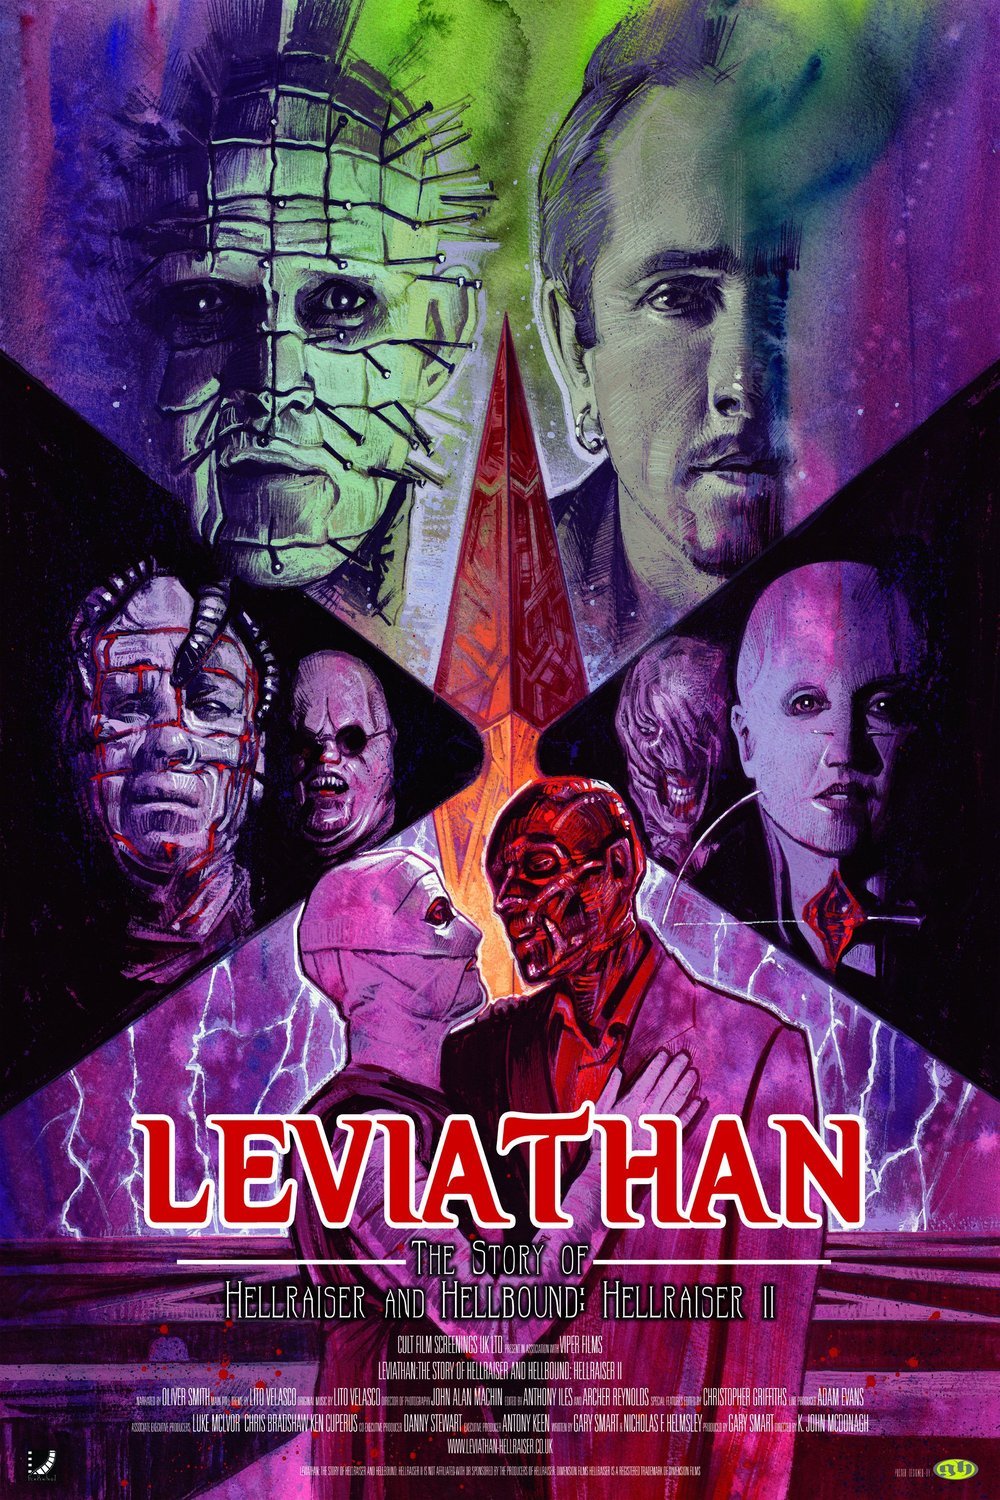 L'affiche du film Leviathan: The Story of Hellraiser and Hellbound: Hellraiser II